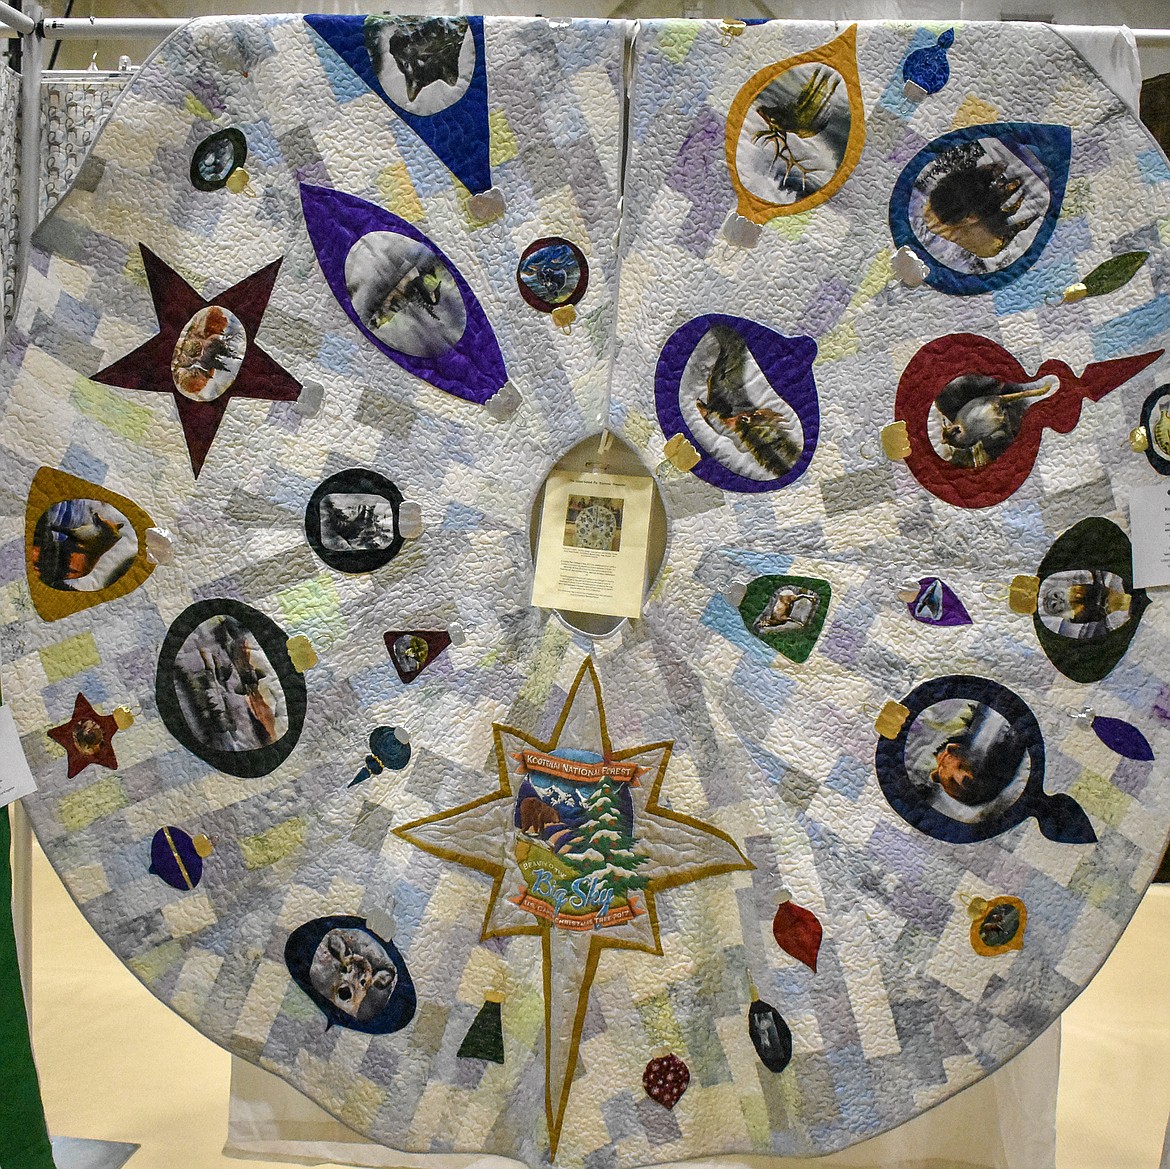 Included in the show were pieces such as &#147;Kootenai Treasures,&#148; a tree skirt made by the Wednesday Nite Quilters from Eureka for the 25-foot Christmas tree that went from the Kootenai National Forest to the Secretary of Agriculture&#146;s office in 2017.